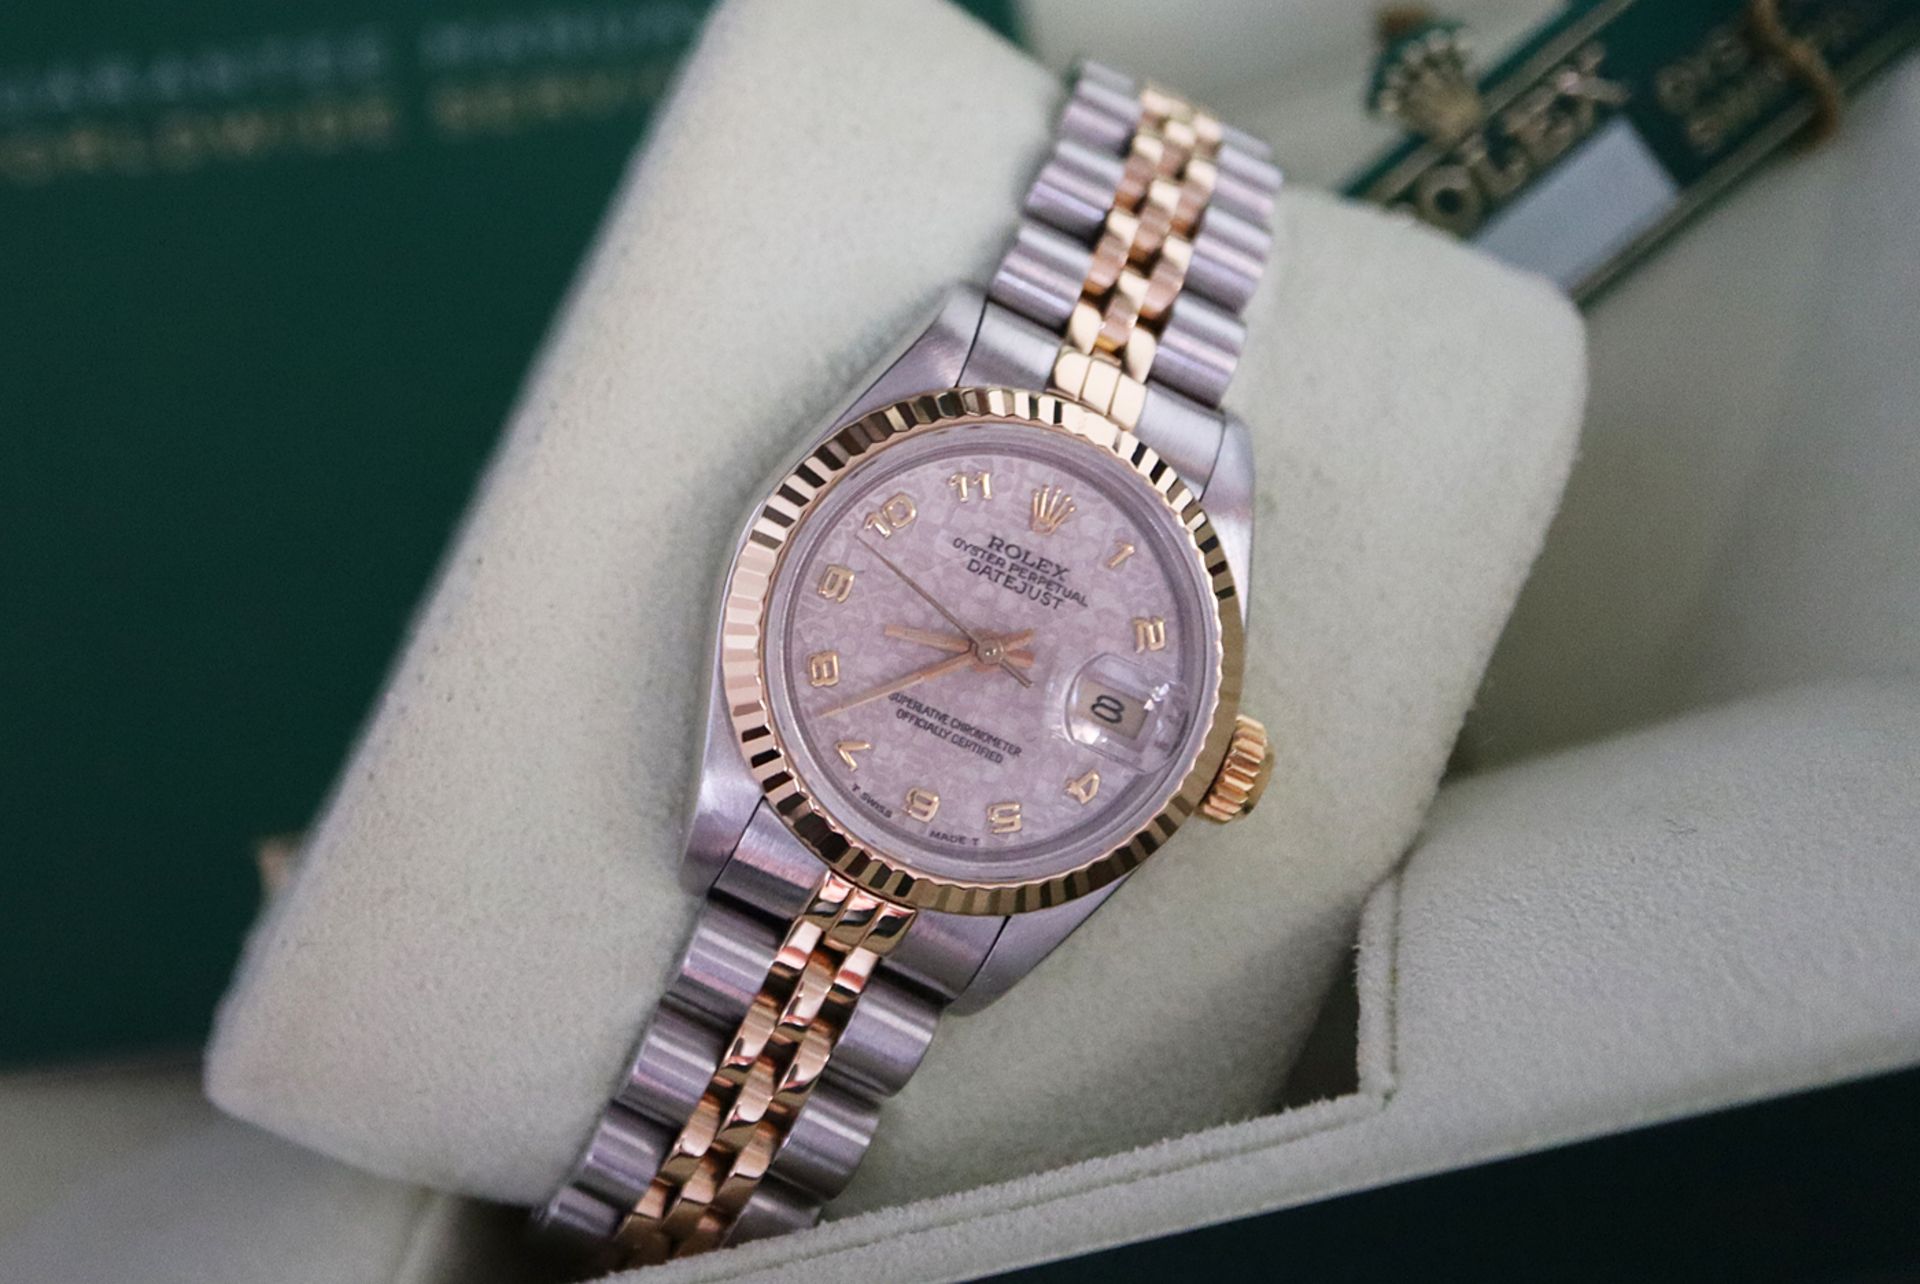 *BOX & PAPERS* ROLEX DATEJUST 18K YELLOW GOLD & STEEL REF. 69173 26MM LADIES MODEL - Image 6 of 6